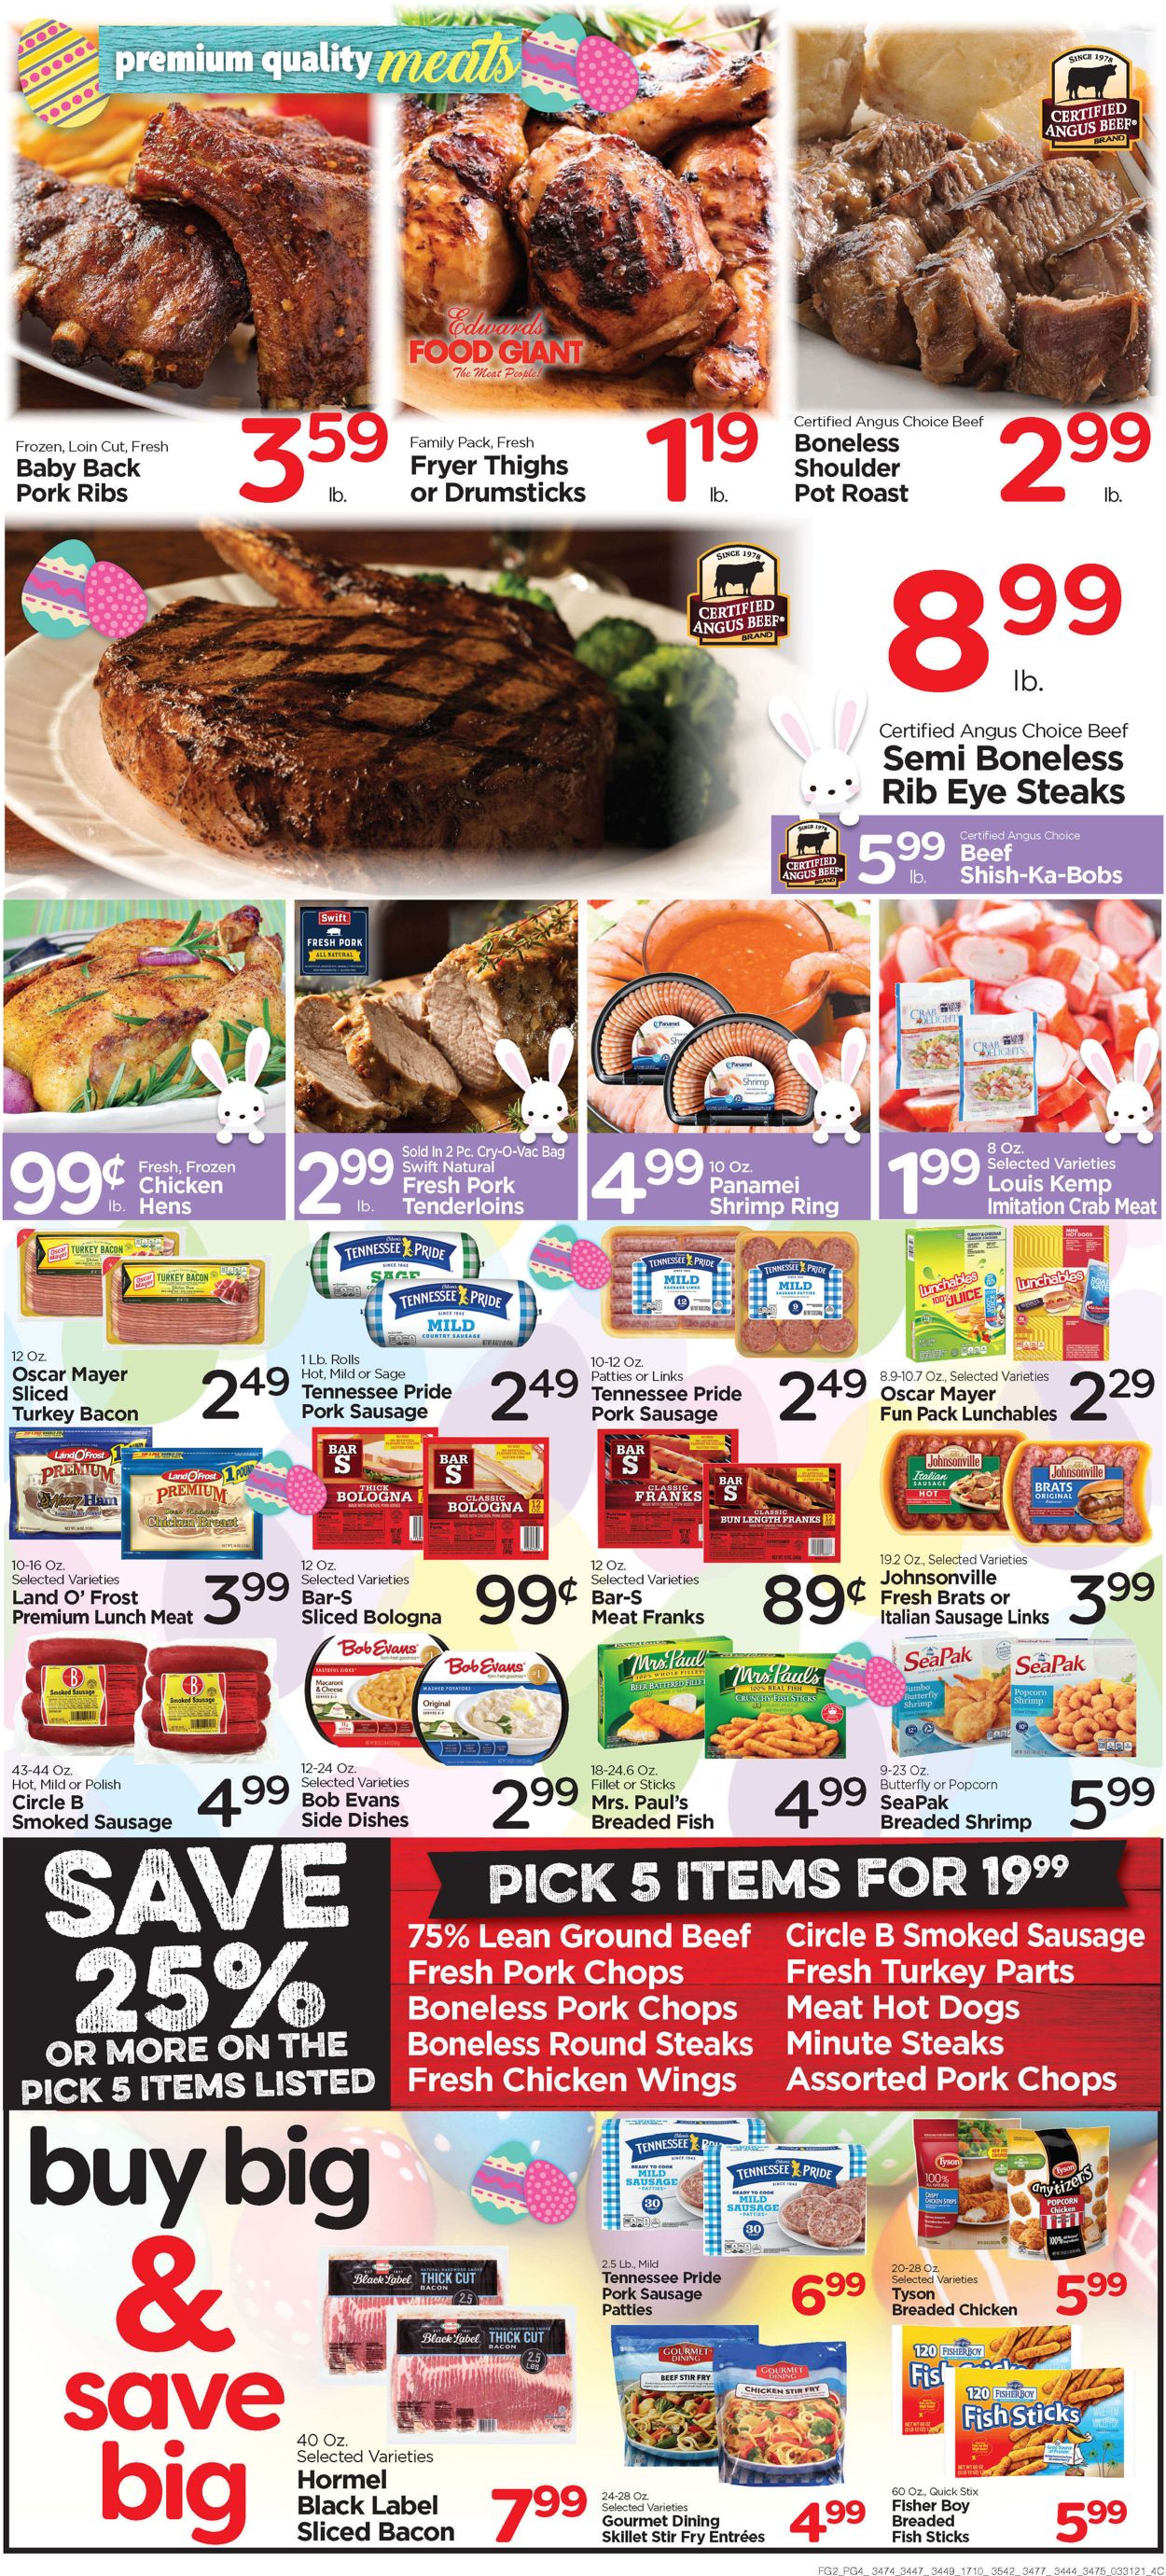 Edwards Food Giant Easter 2021 ad Weekly Ad Circular - valid 03/31-04/06/2021 (Page 4)